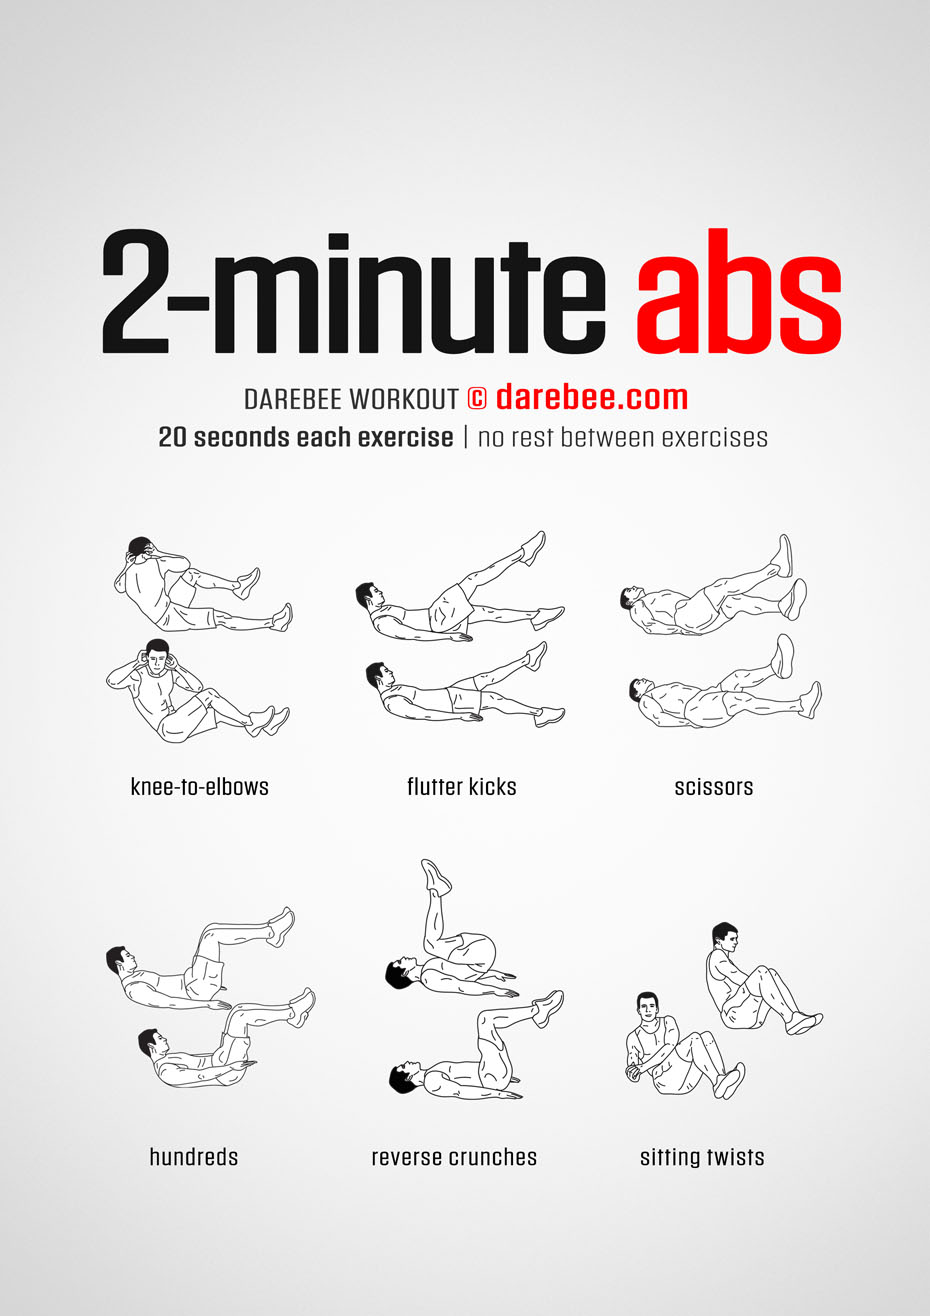 What Exercises Help You Get Abs Exercise Poster